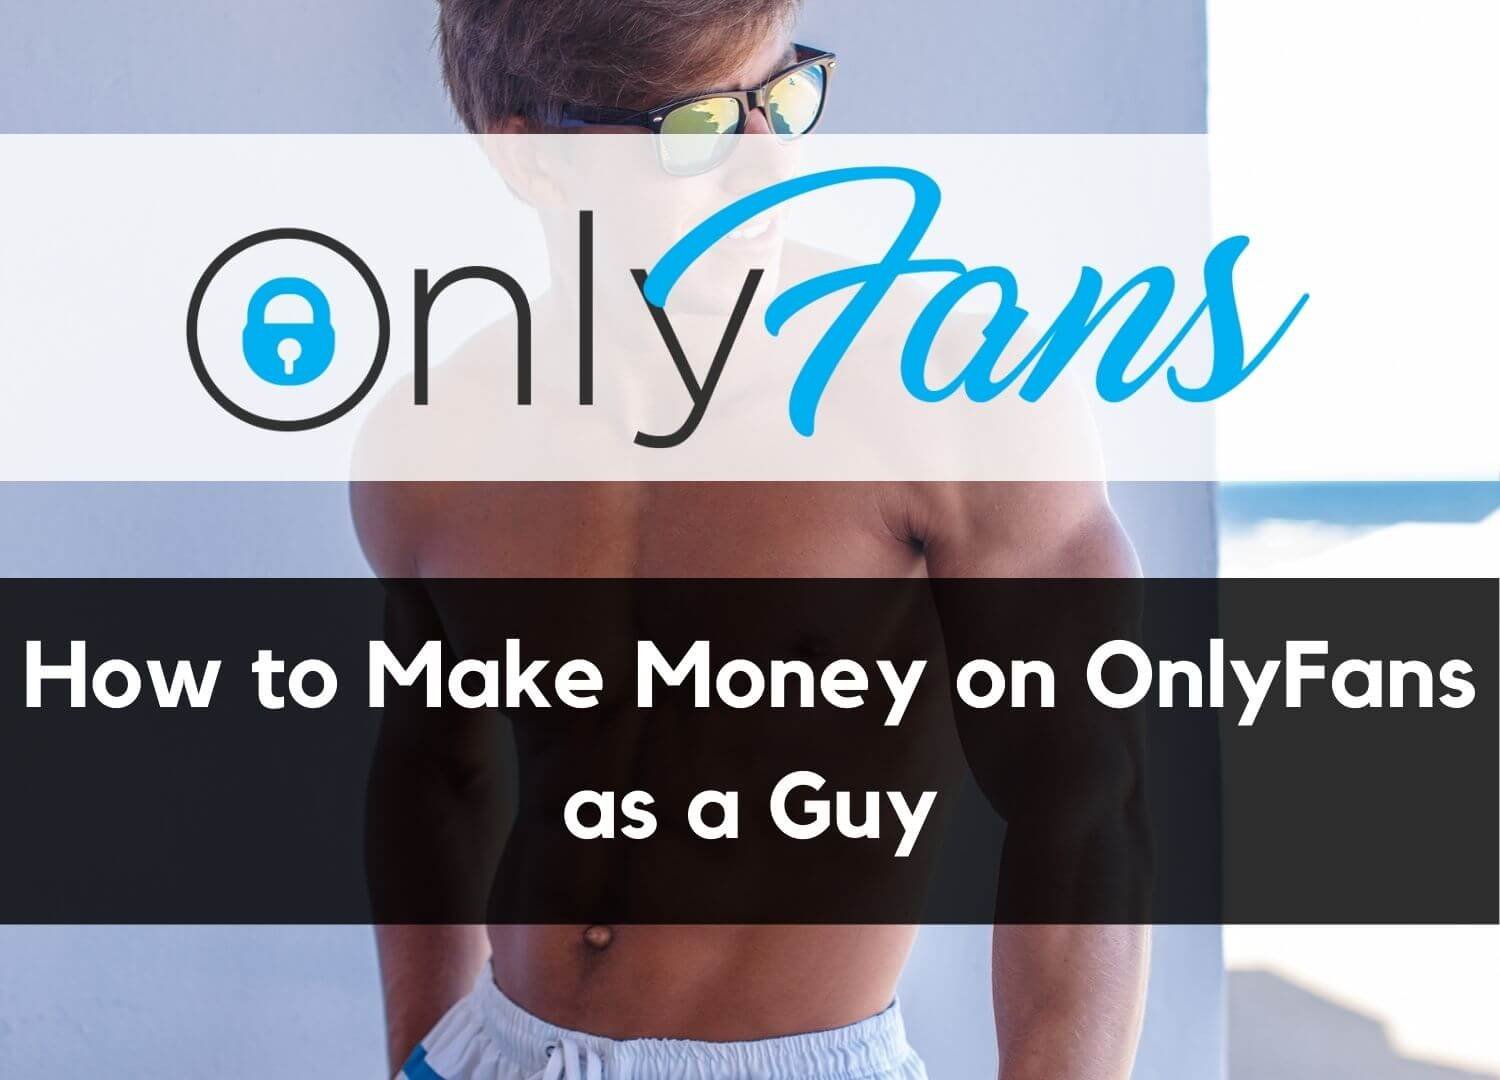 Man onlyfans on make can money Do you